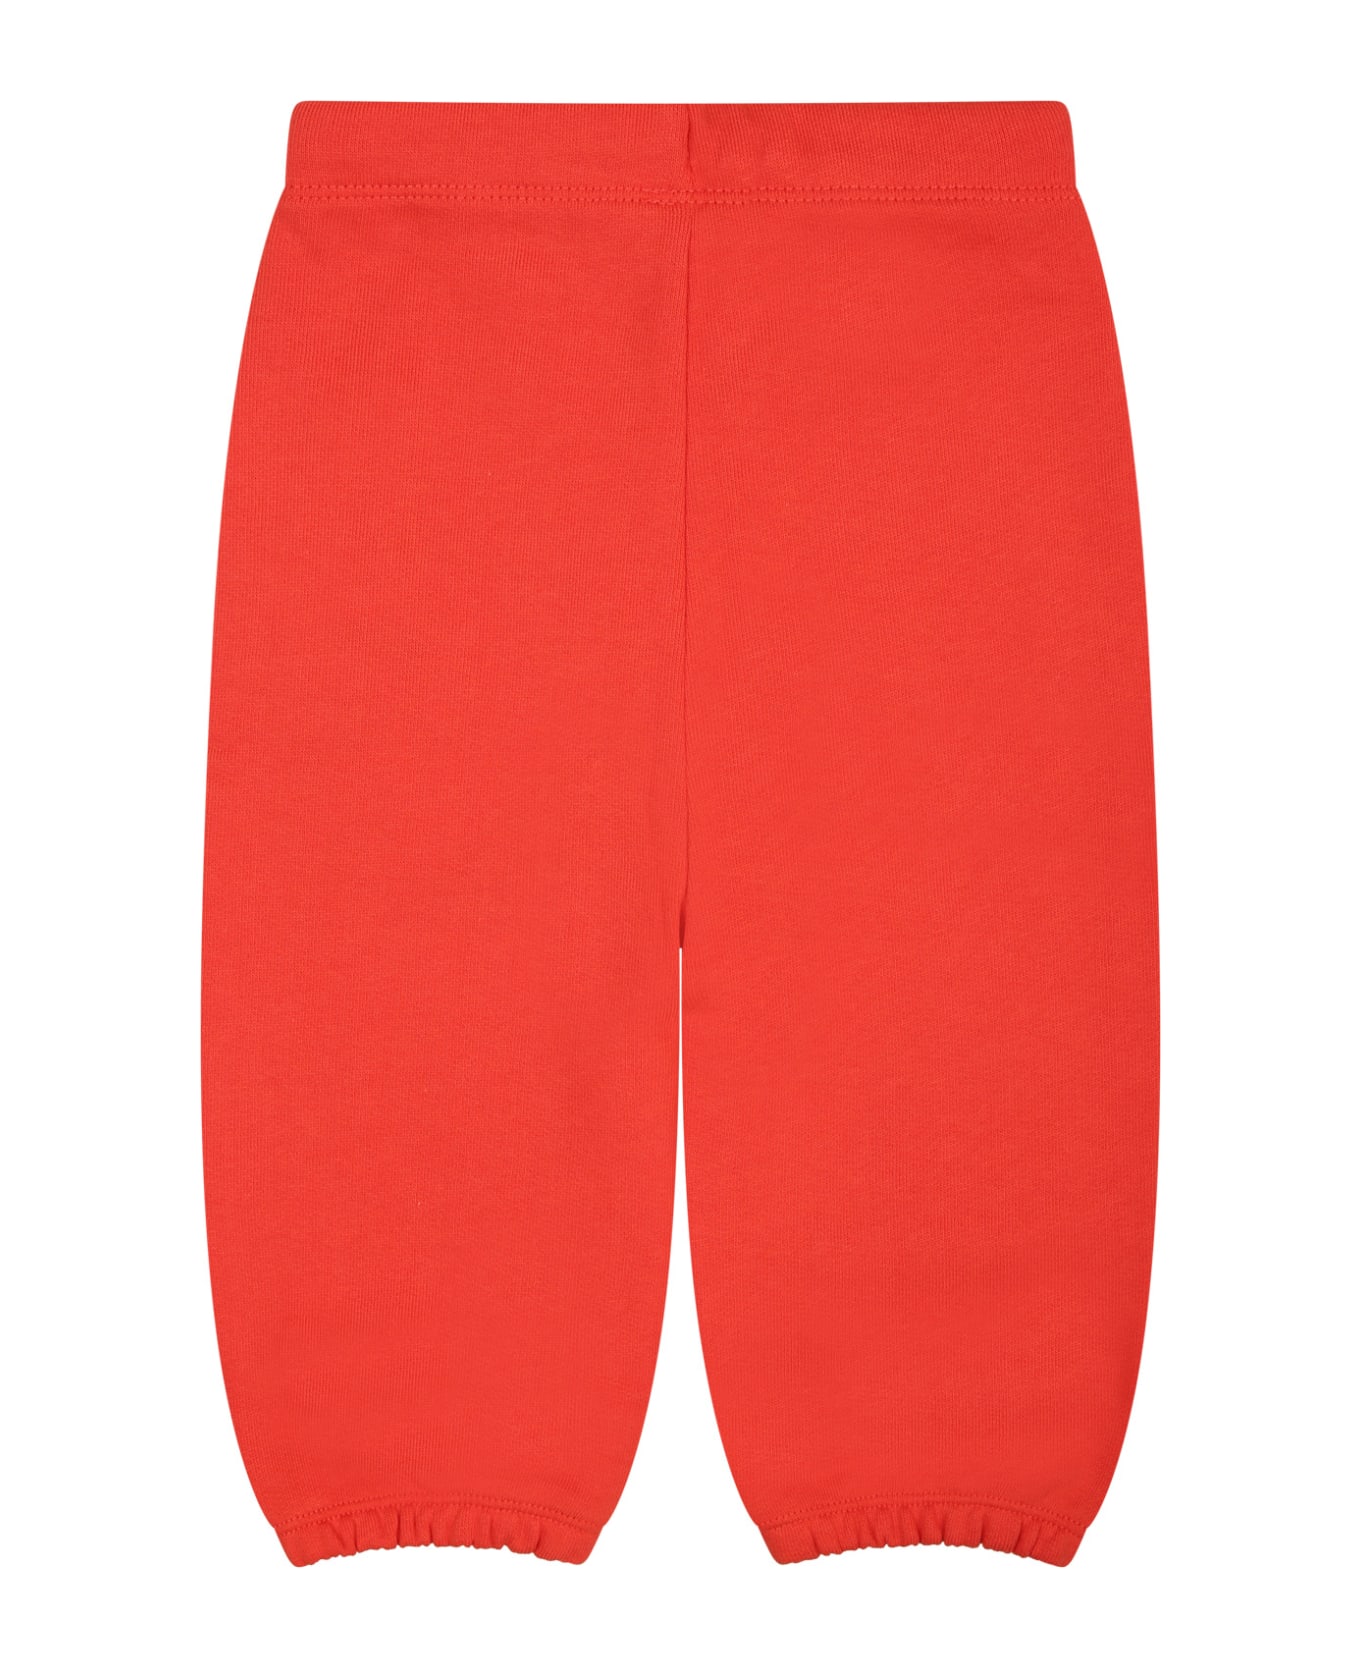 Stella McCartney Kids Red Trousers For Baby Boy With Sun Print - Red ボトムス